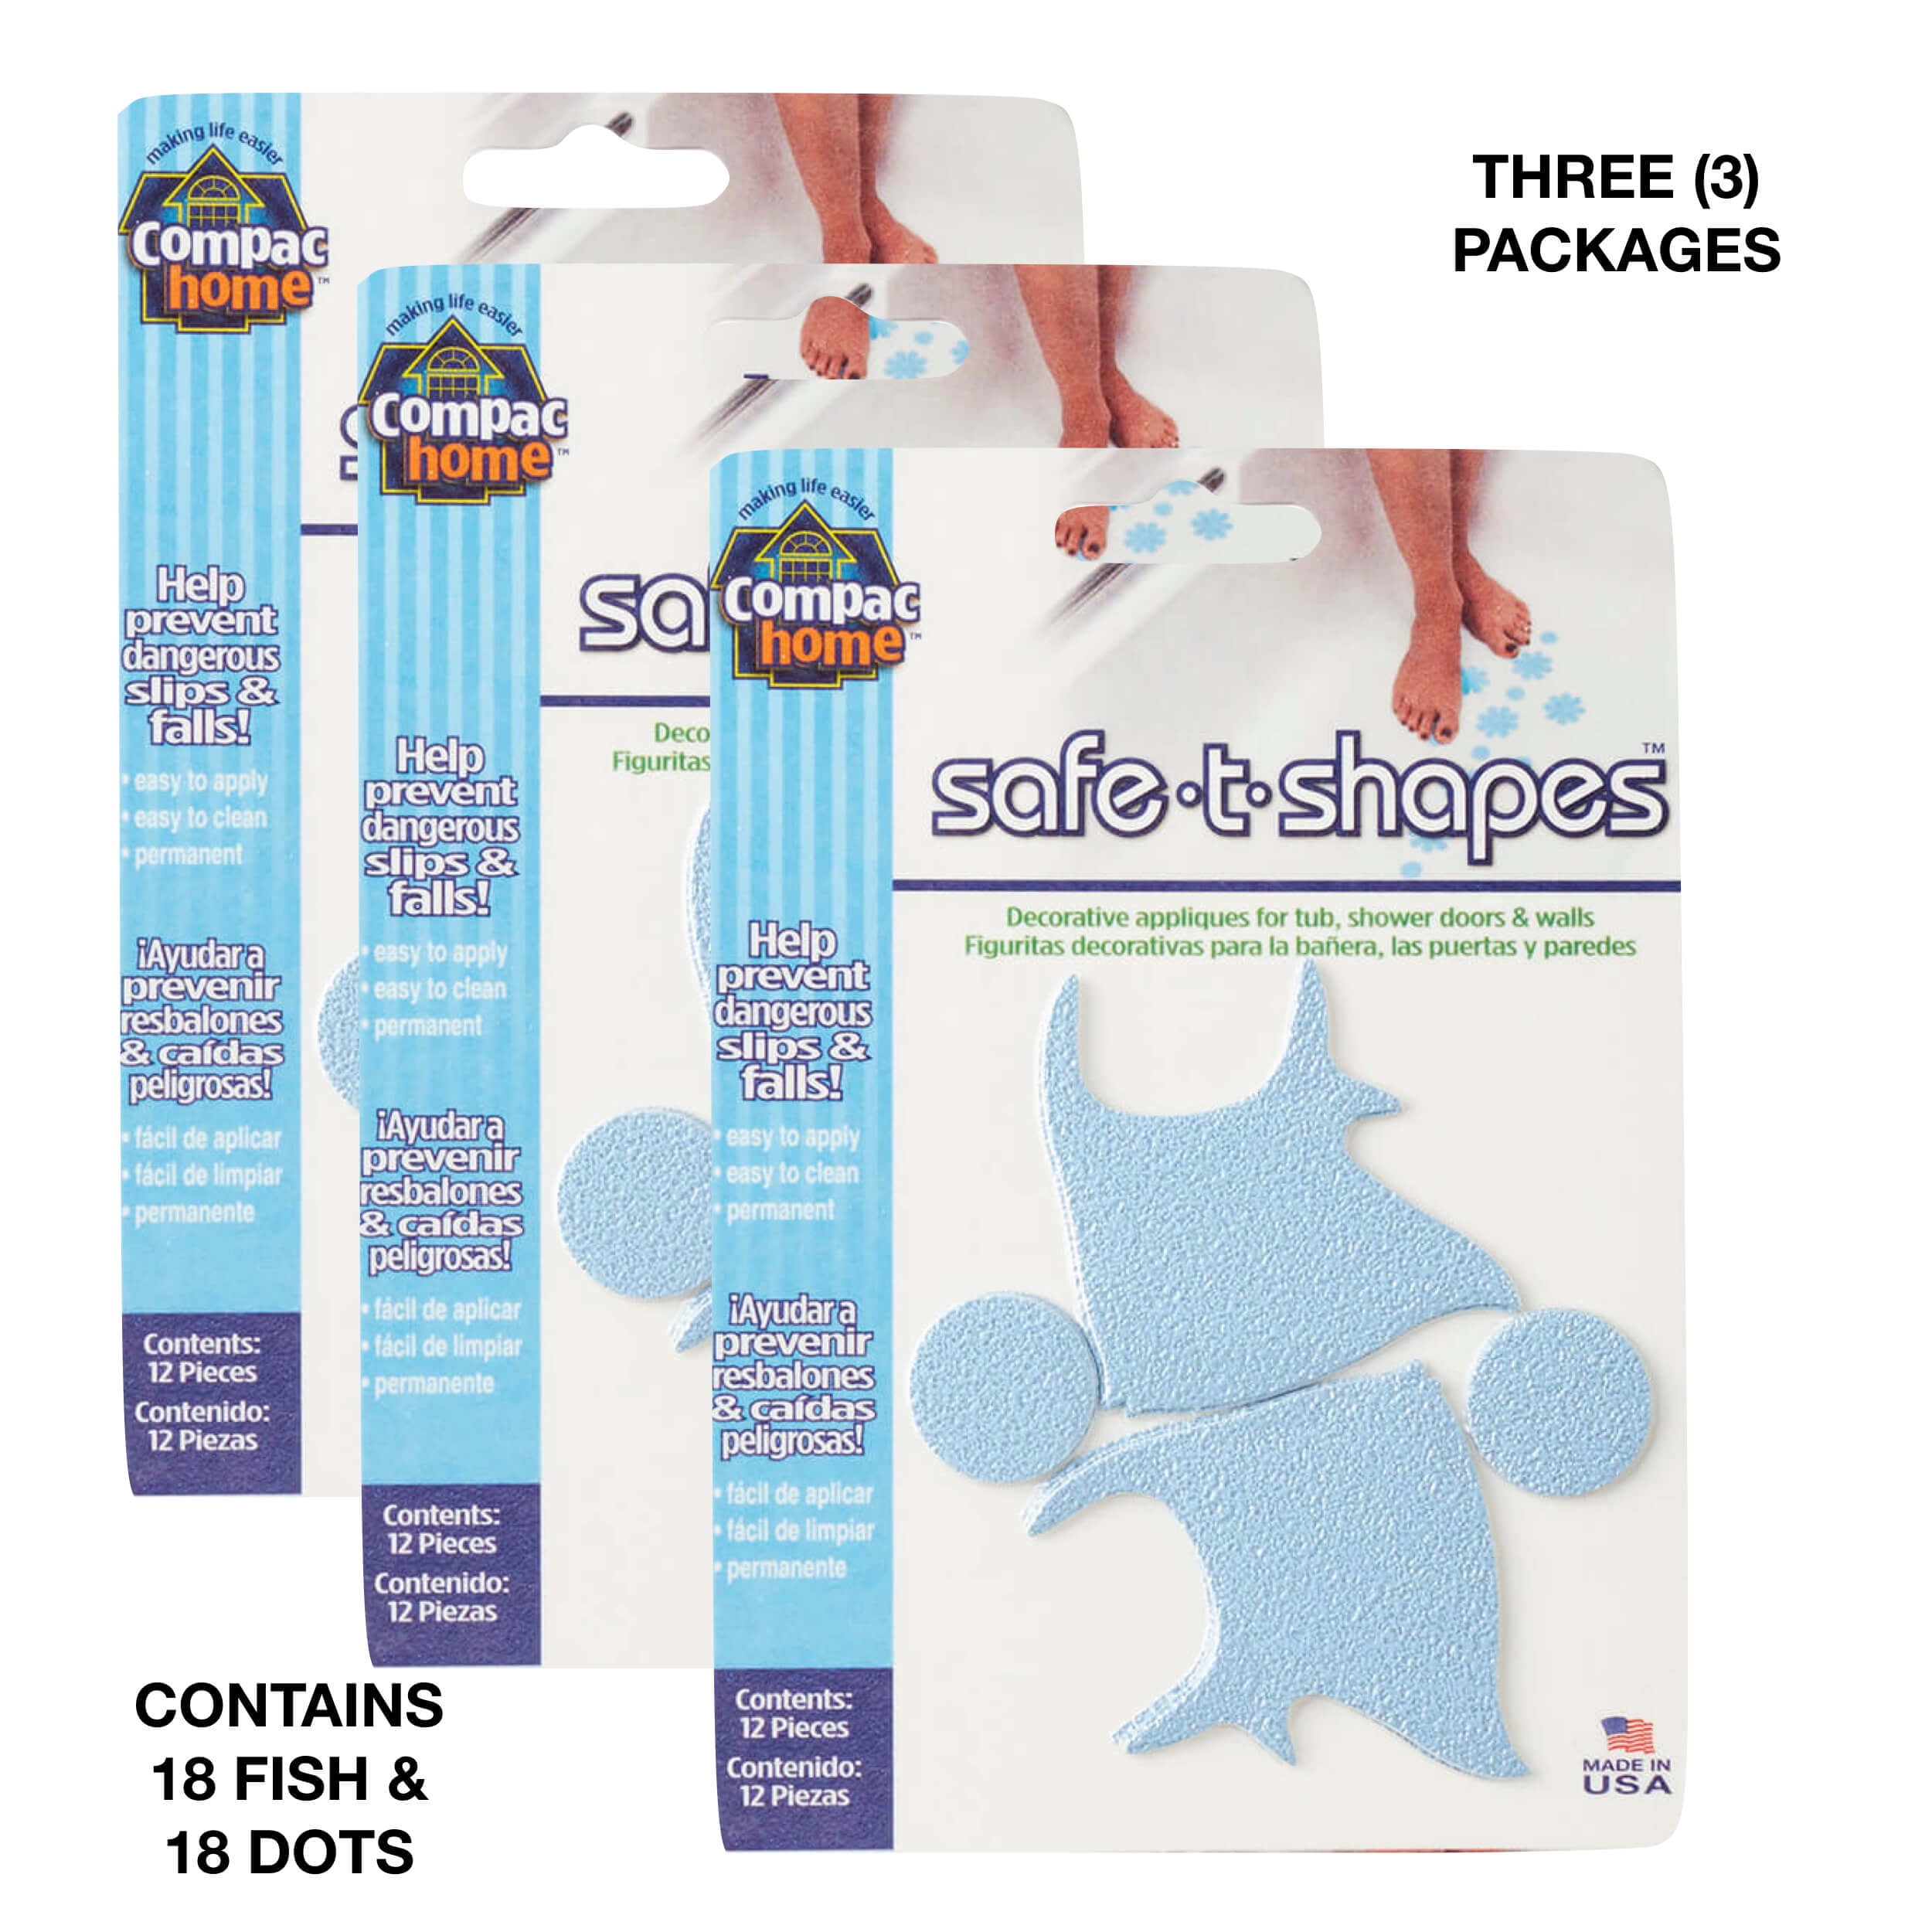 Compac Home Safe-T-Shapes Adhesive Non-Slip Bath Appliques to Help Prevent Falls 